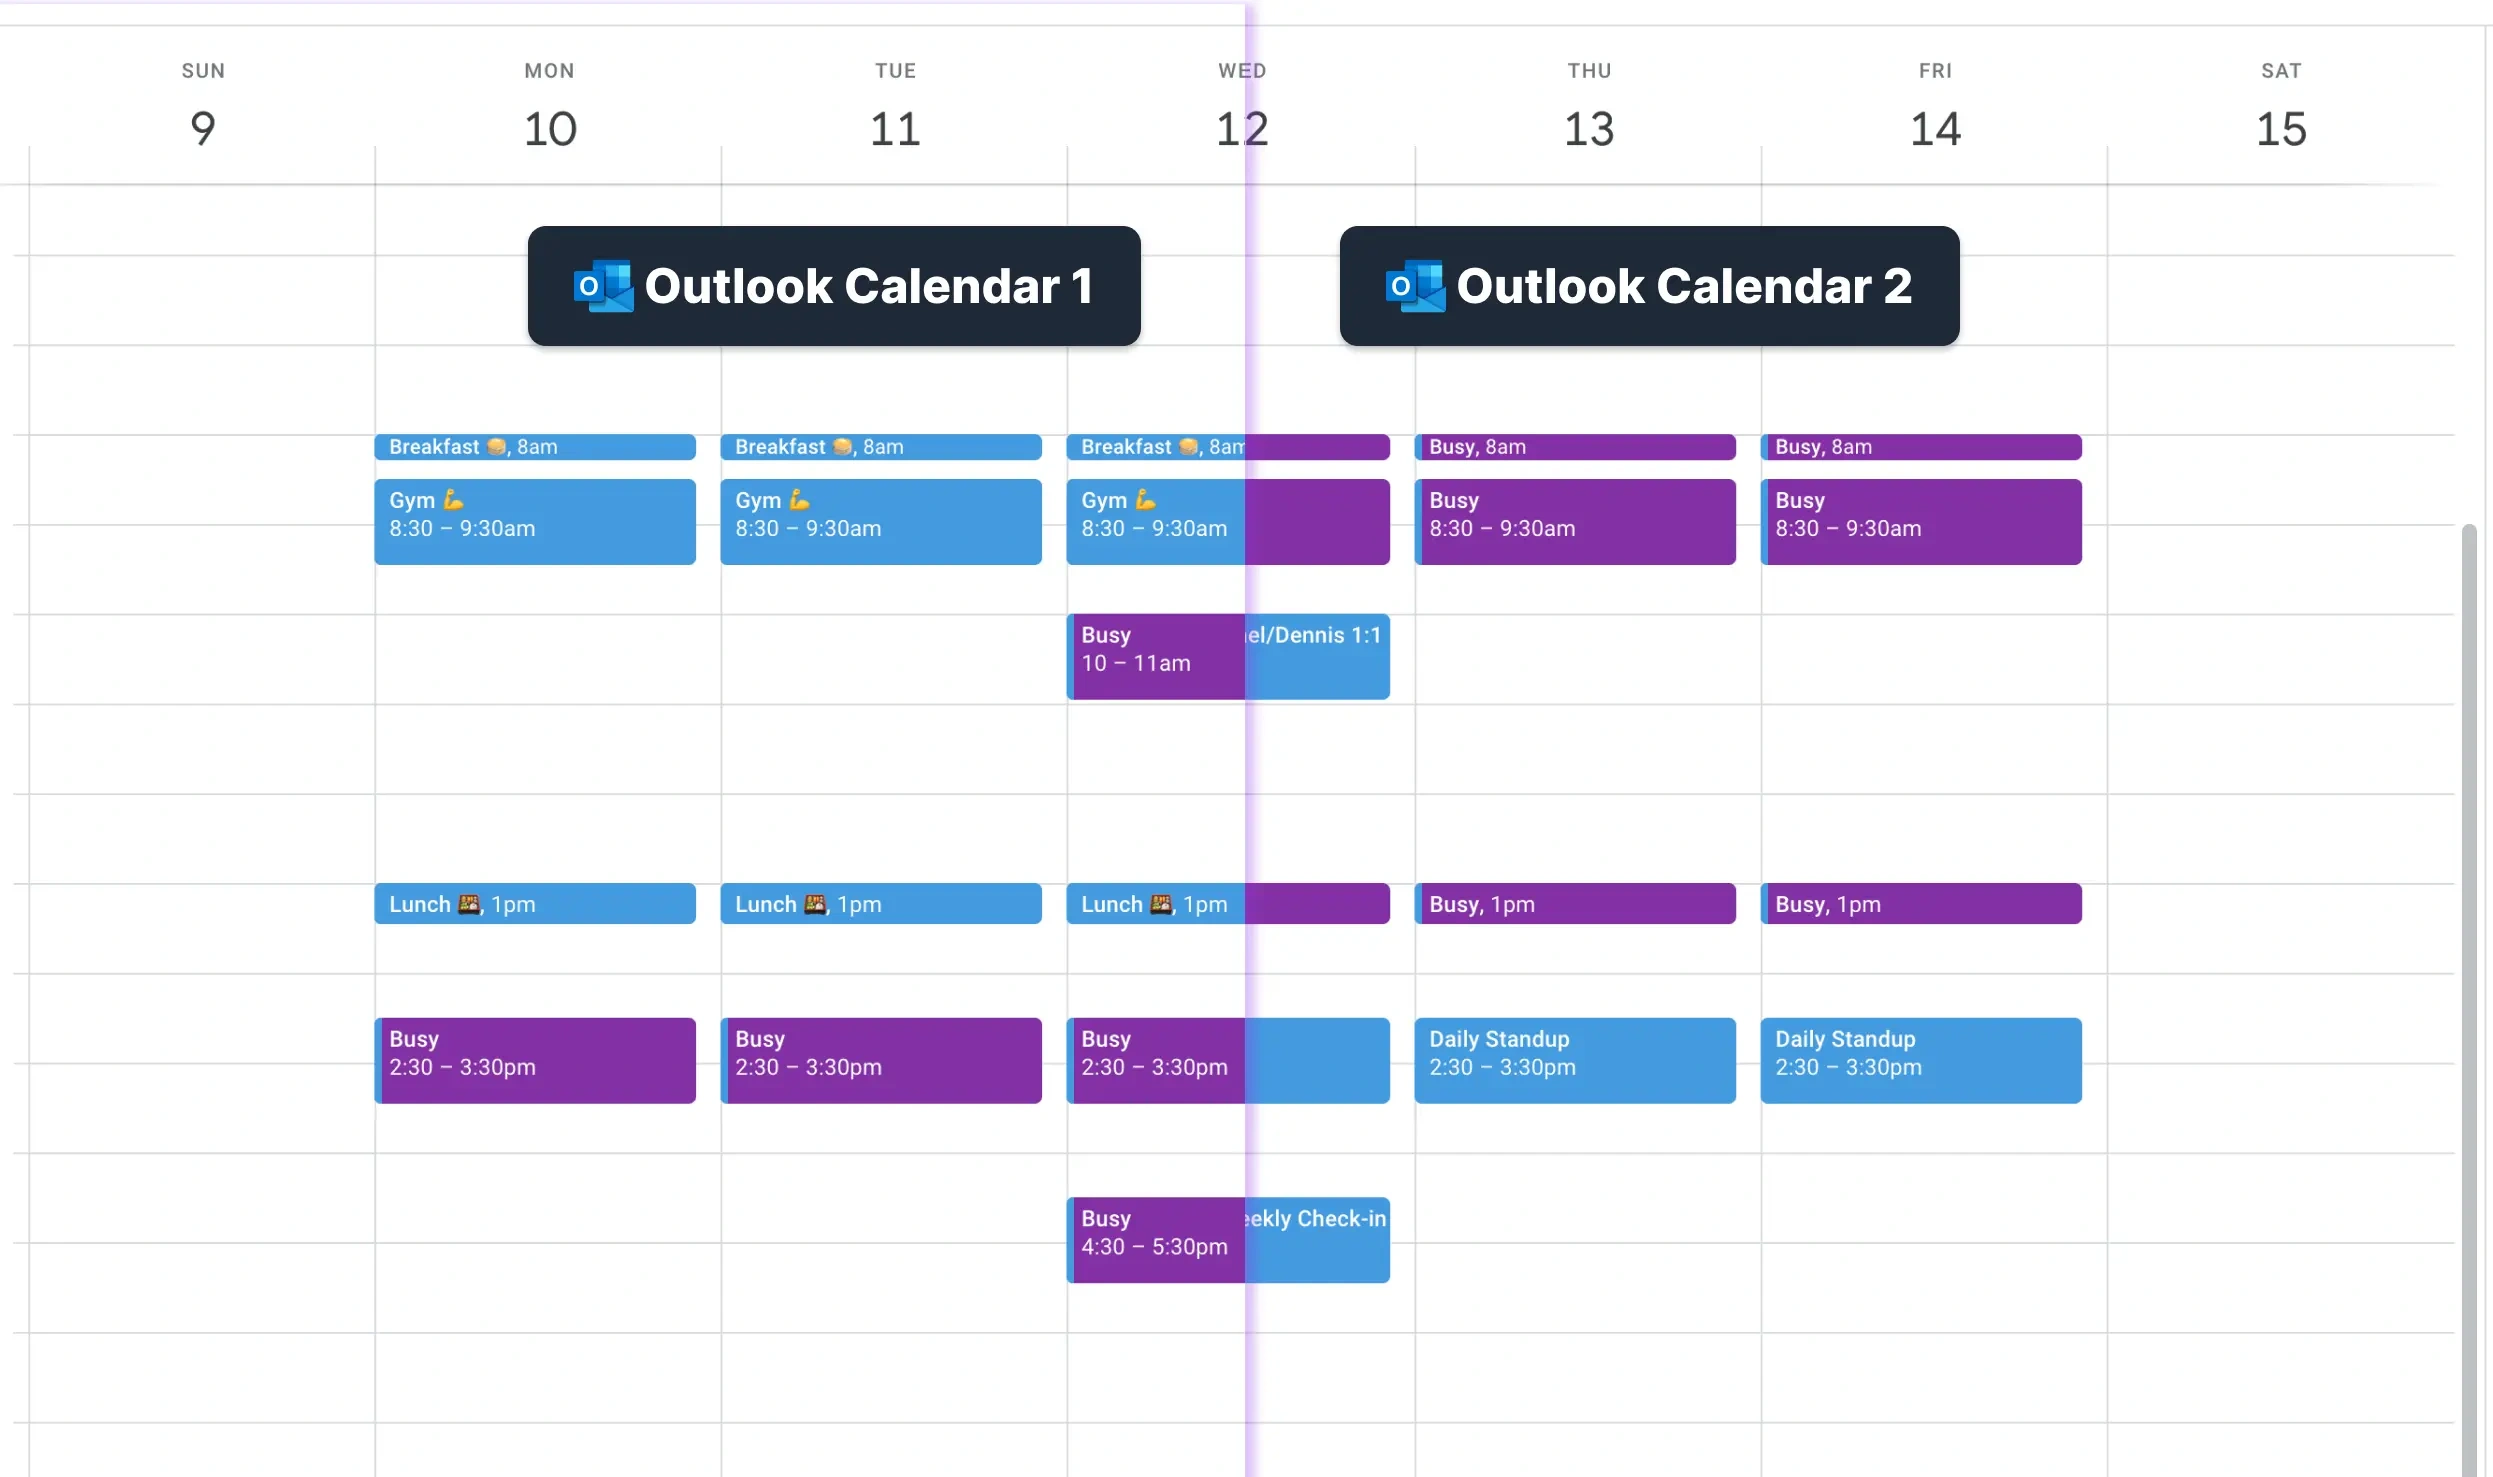 Example of merged Outlook Calendars